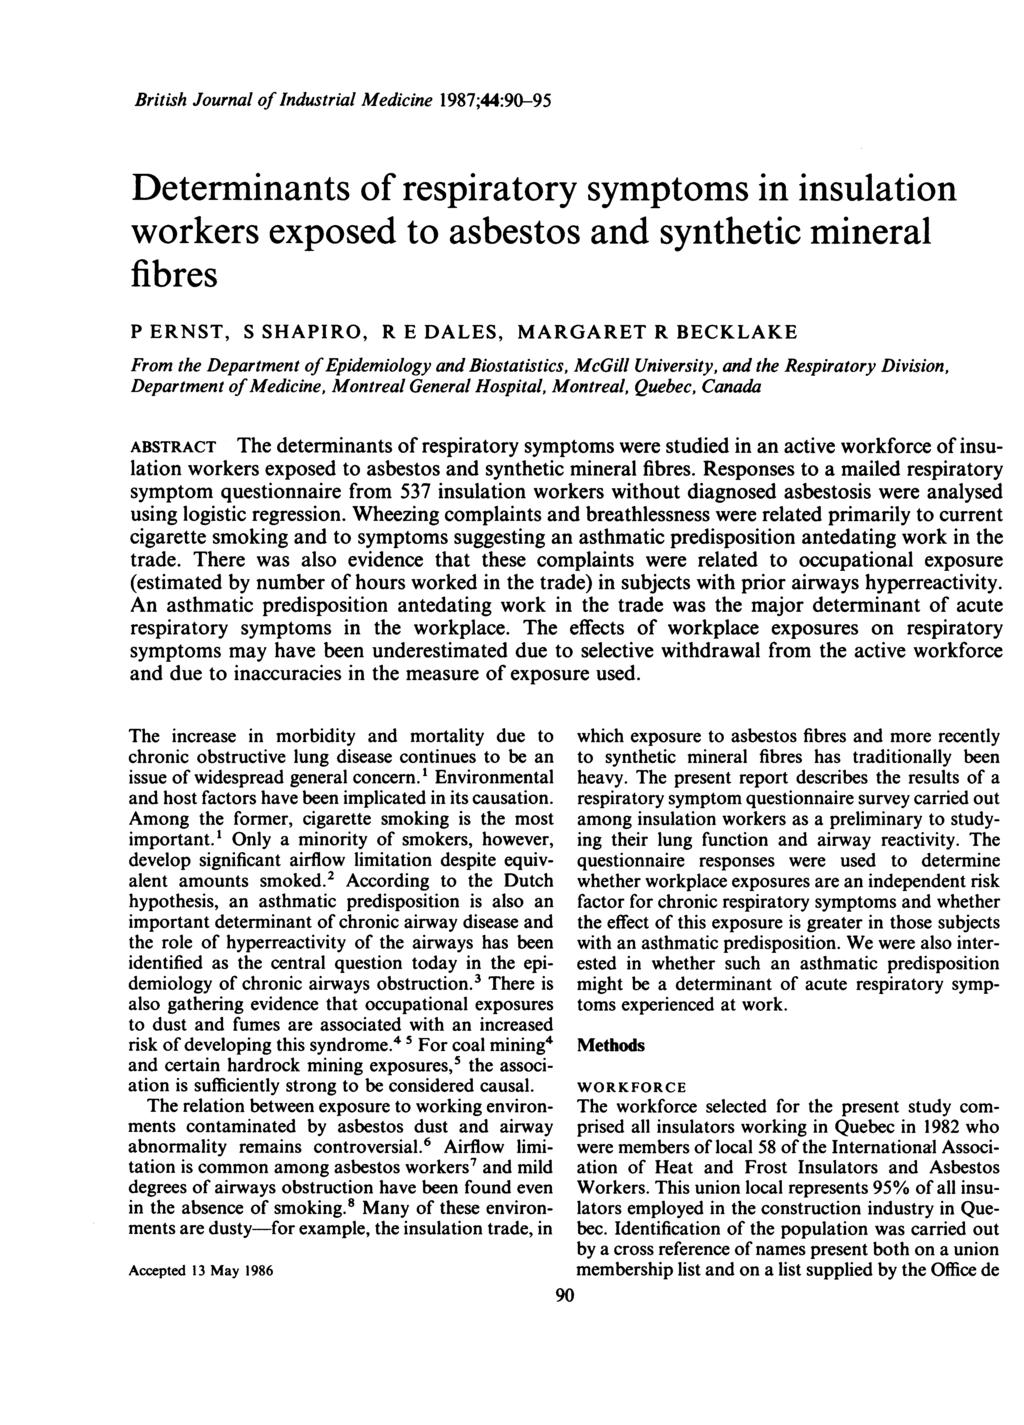 British Journal of Industrial Medicine 1987;44:90-95 Determinants of respiratory symptoms in insulation workers exposed to asbestos and synthetic mineral fibres P ERNST, S SHAPIRO, R E DALES,